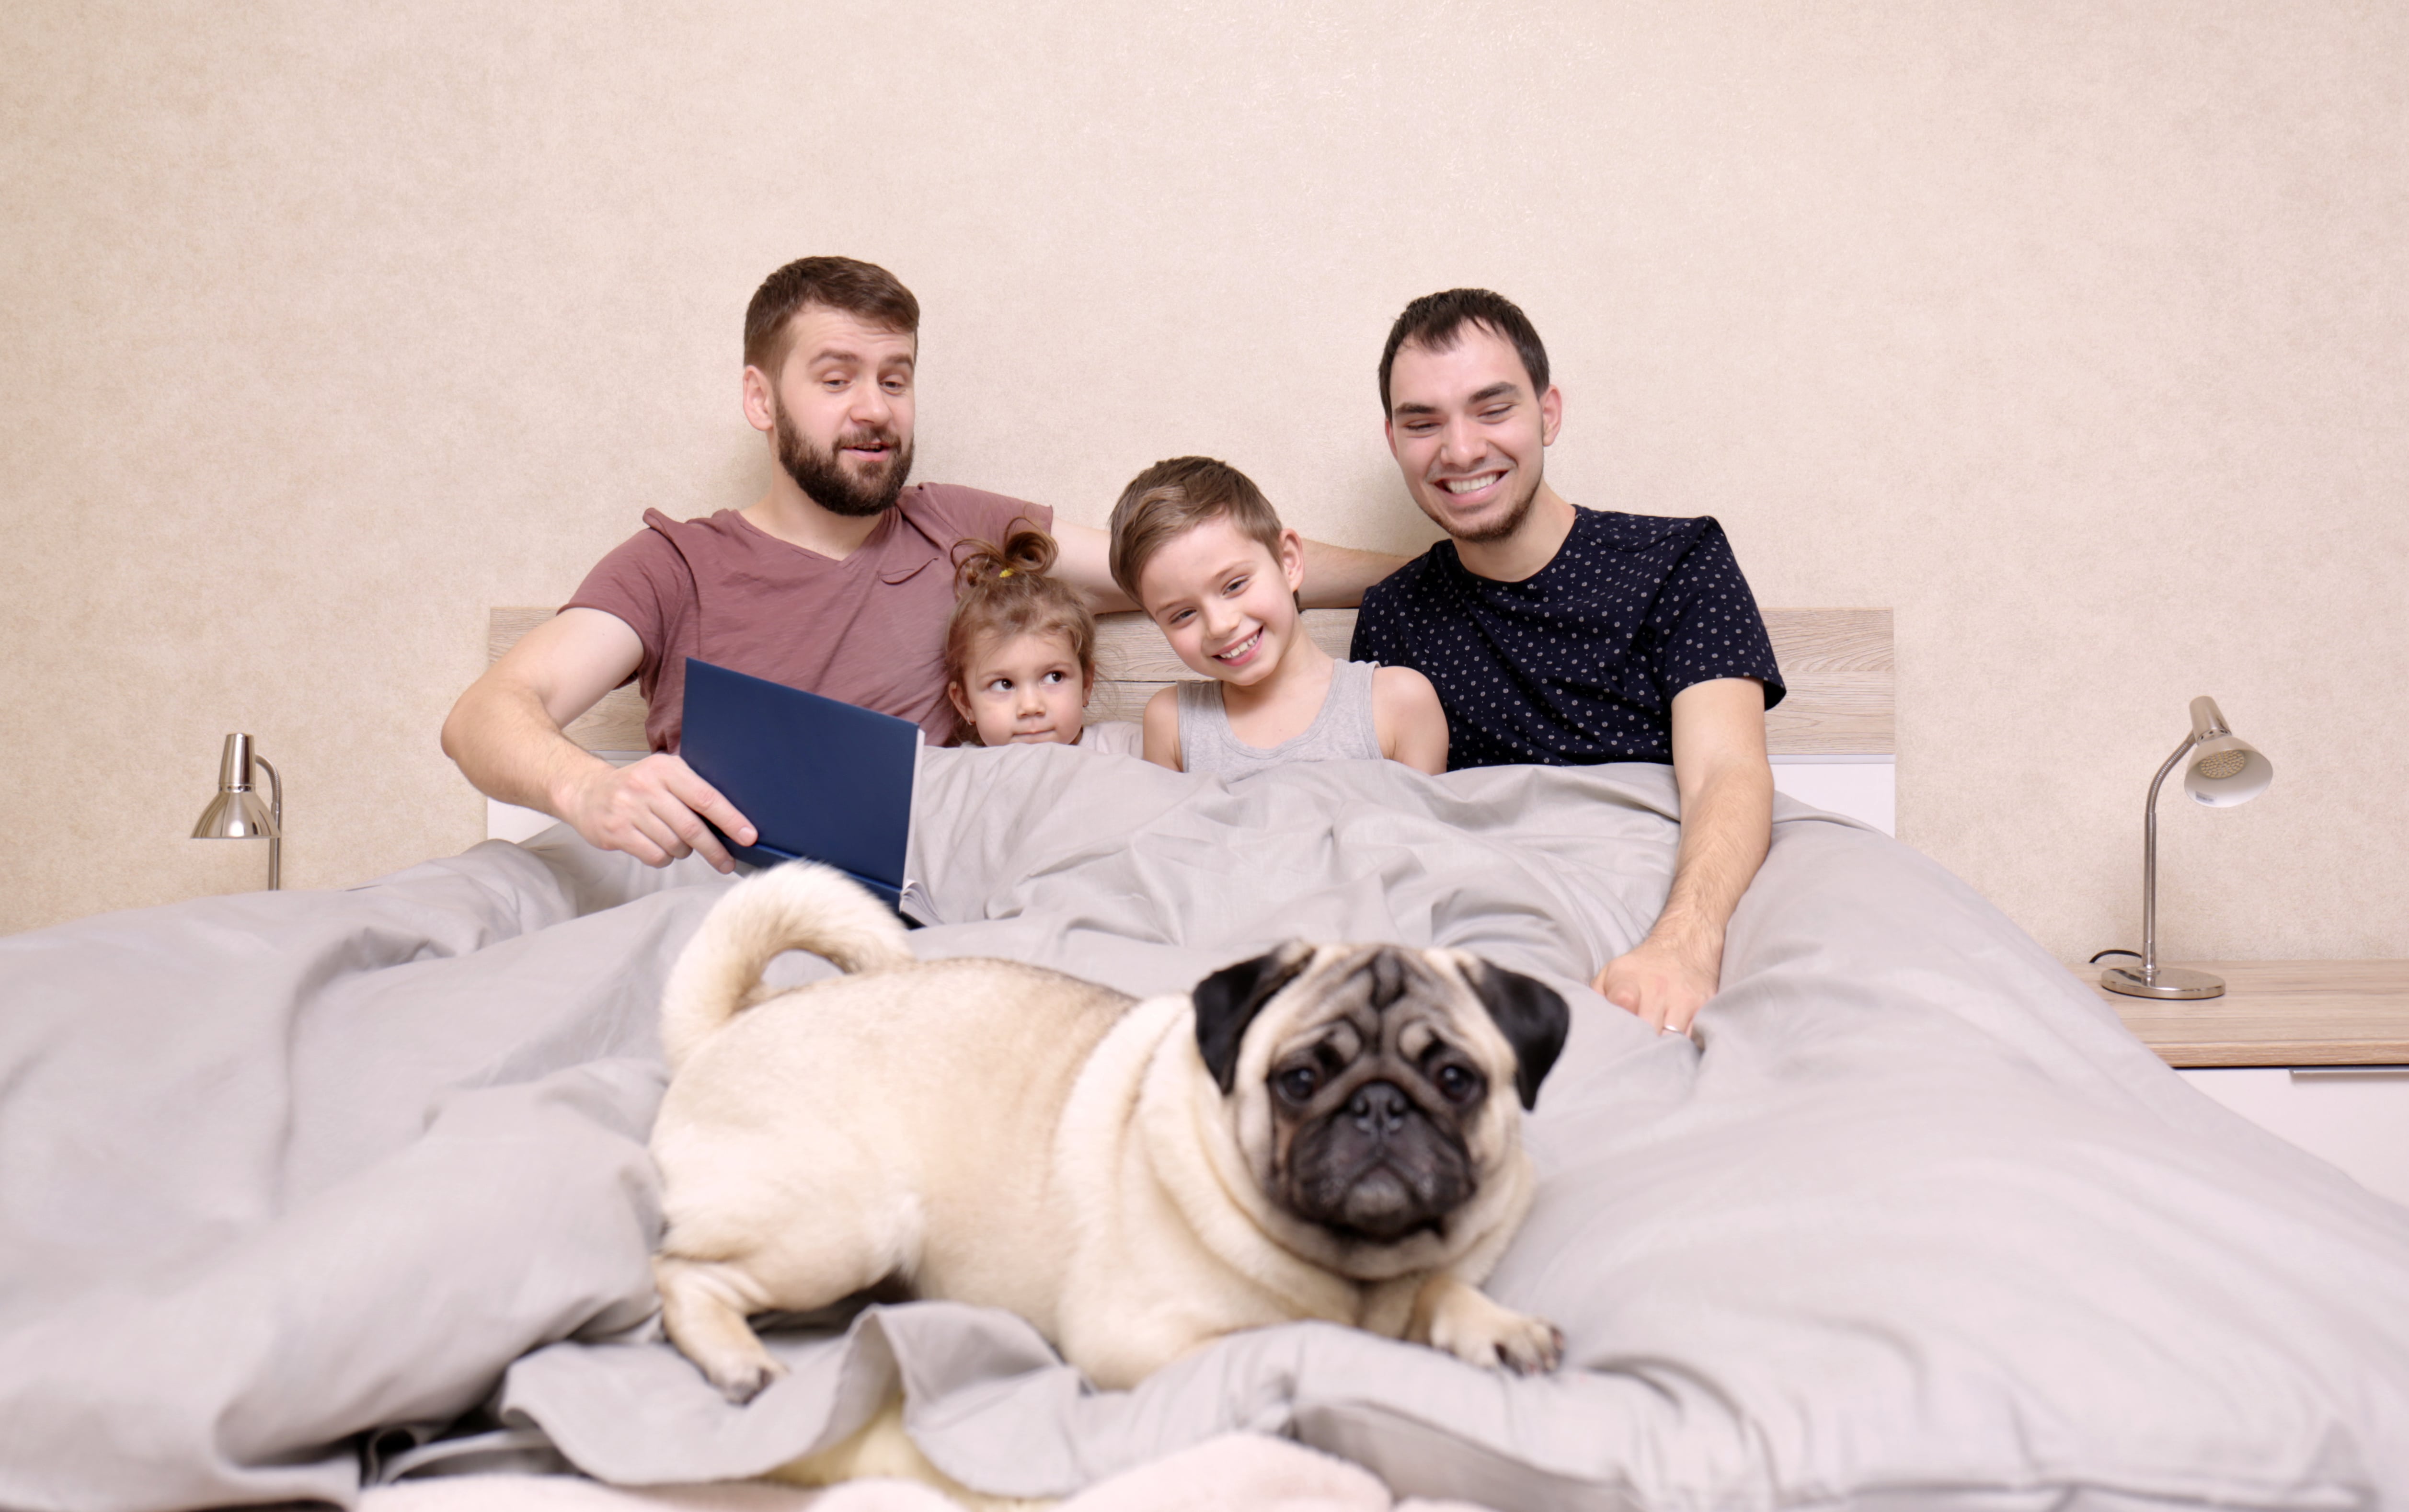 A family of 5 squished into a double bed: two dads, a young smiling boy, a little girl and a pug. One of the dads is trying to read a book, the other is laughing at the dog along with the little boy.